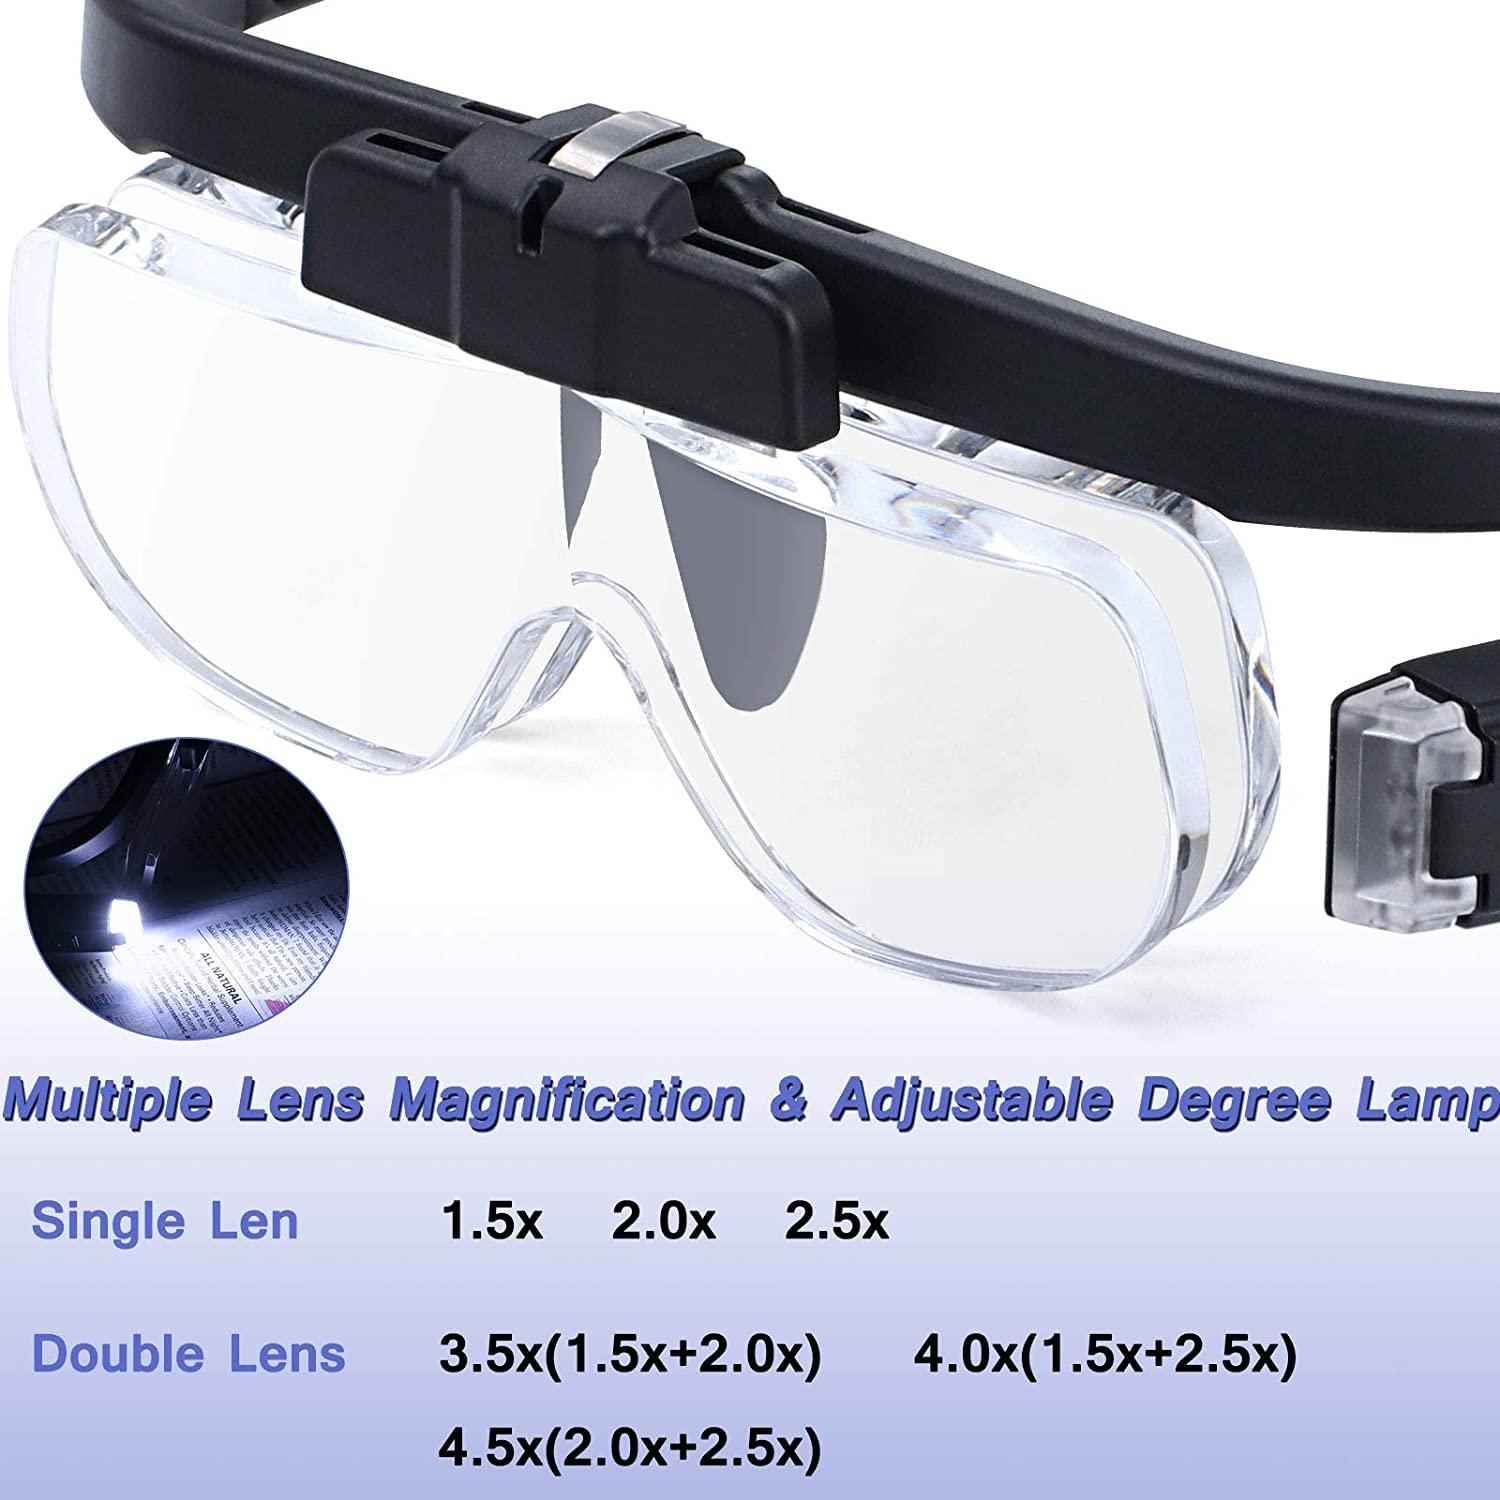 magnifying glasses for close work Magnifying Glass Watch Repair Magnifier